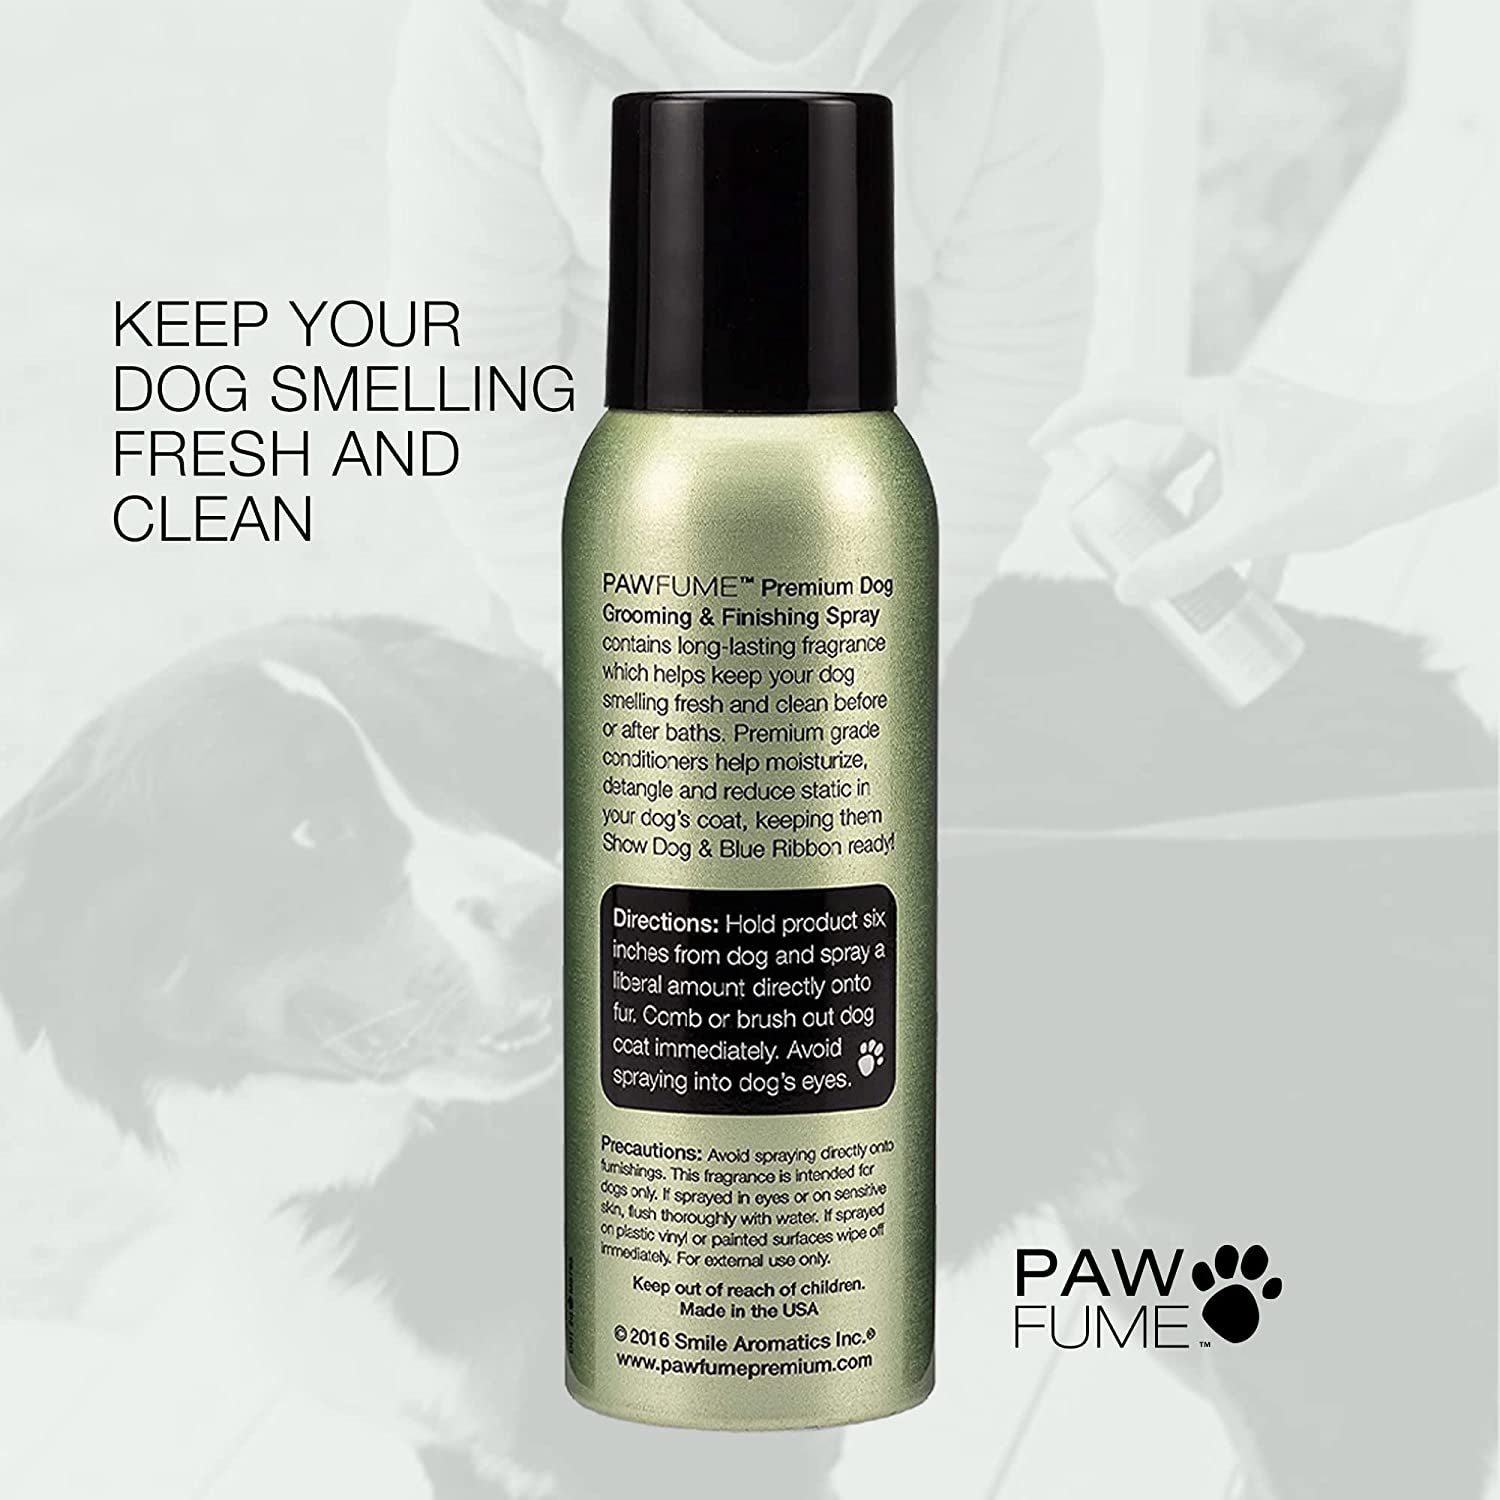 Grooming Spray Dog Spray Deodorizer Perfume for Dogs - Dog Cologne Spr
🐩DESIGNER DOG COLOGNE: Pawfume deodorizing dog spray pairs high-end luxury fragrance with lasting performance. Give your pooch the wellness and coat care it deservDogs - Dog Cologne Spray Long Lasting Dog Sprays - Dog Perfume Spray Long Lasting